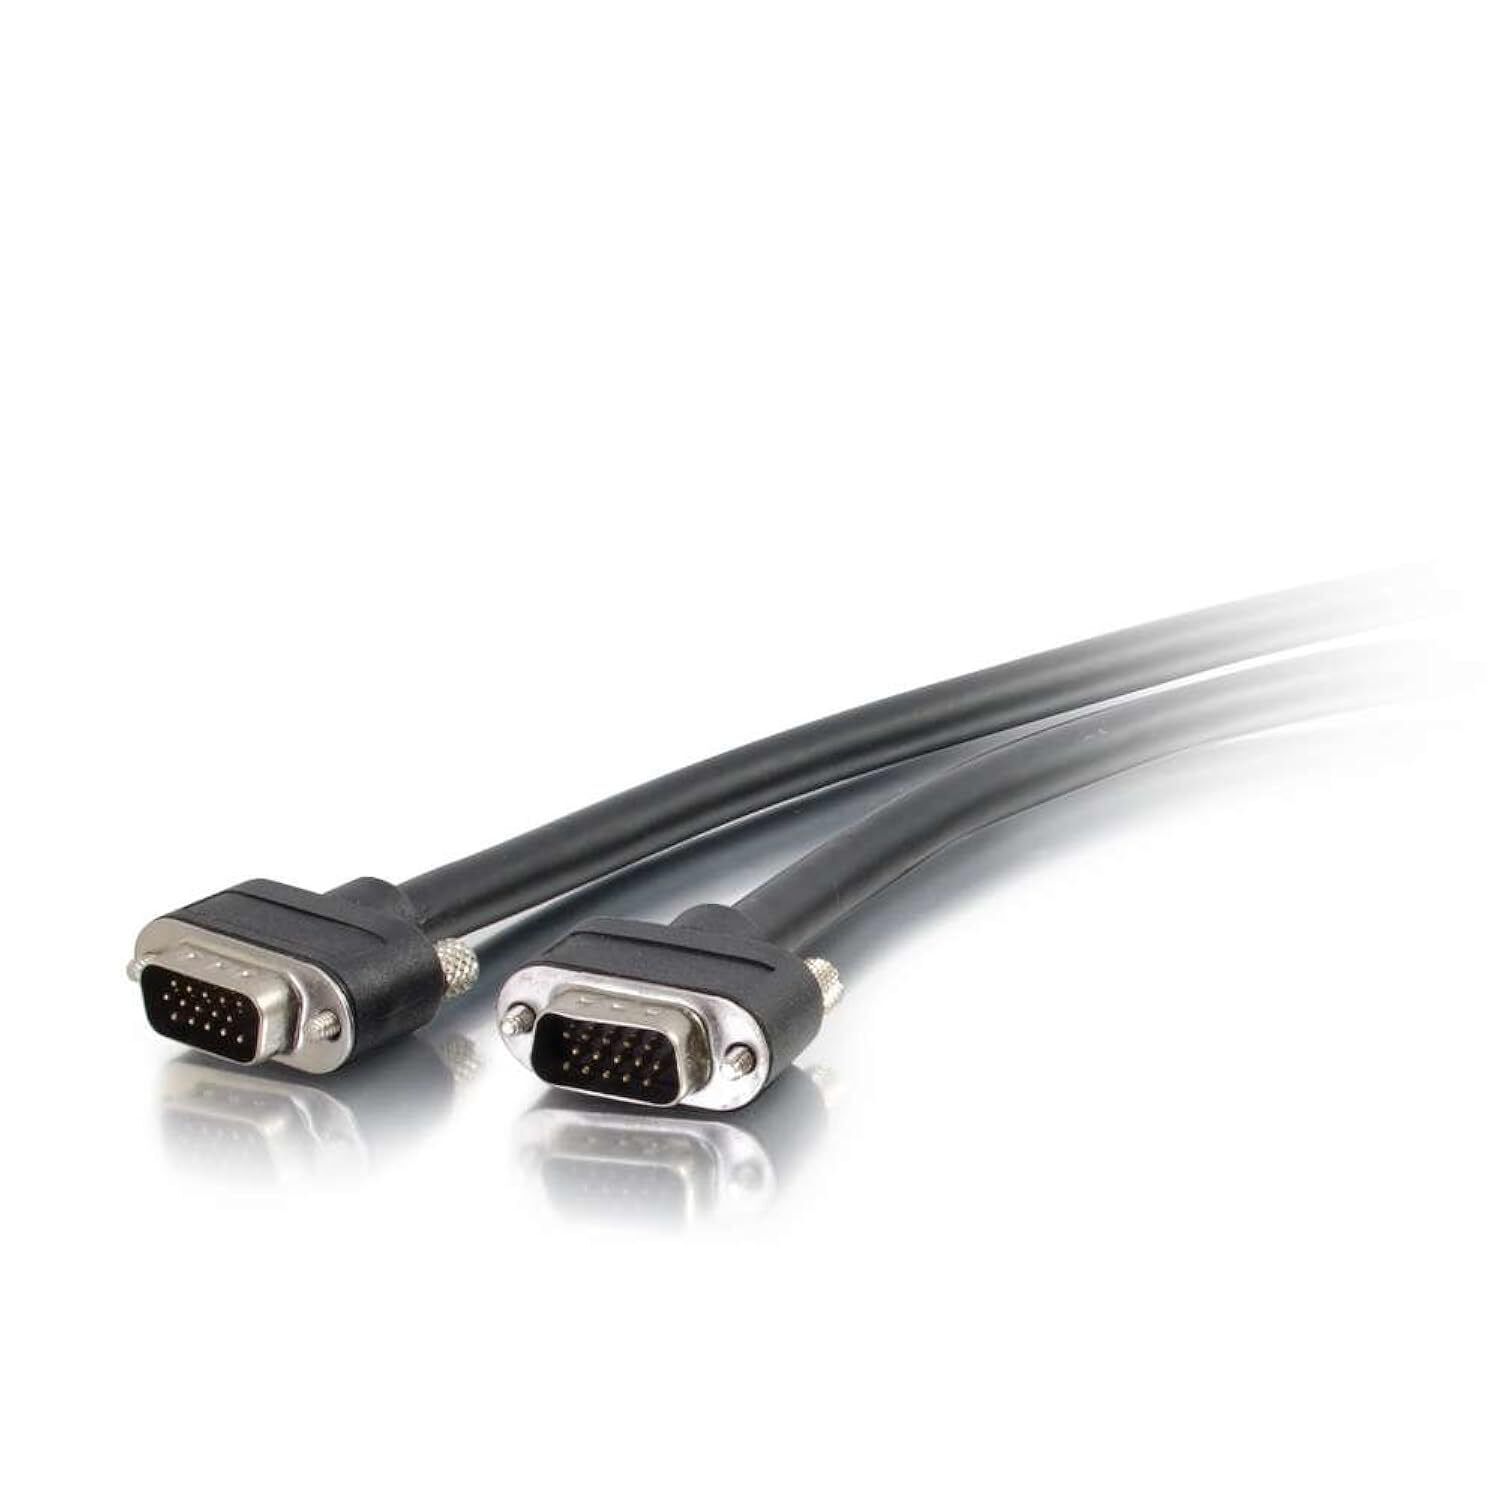 50214 Vga Cable - Select Vga Video Cable M/M, In-Wall Cmg-Rated, Black (12 Fee